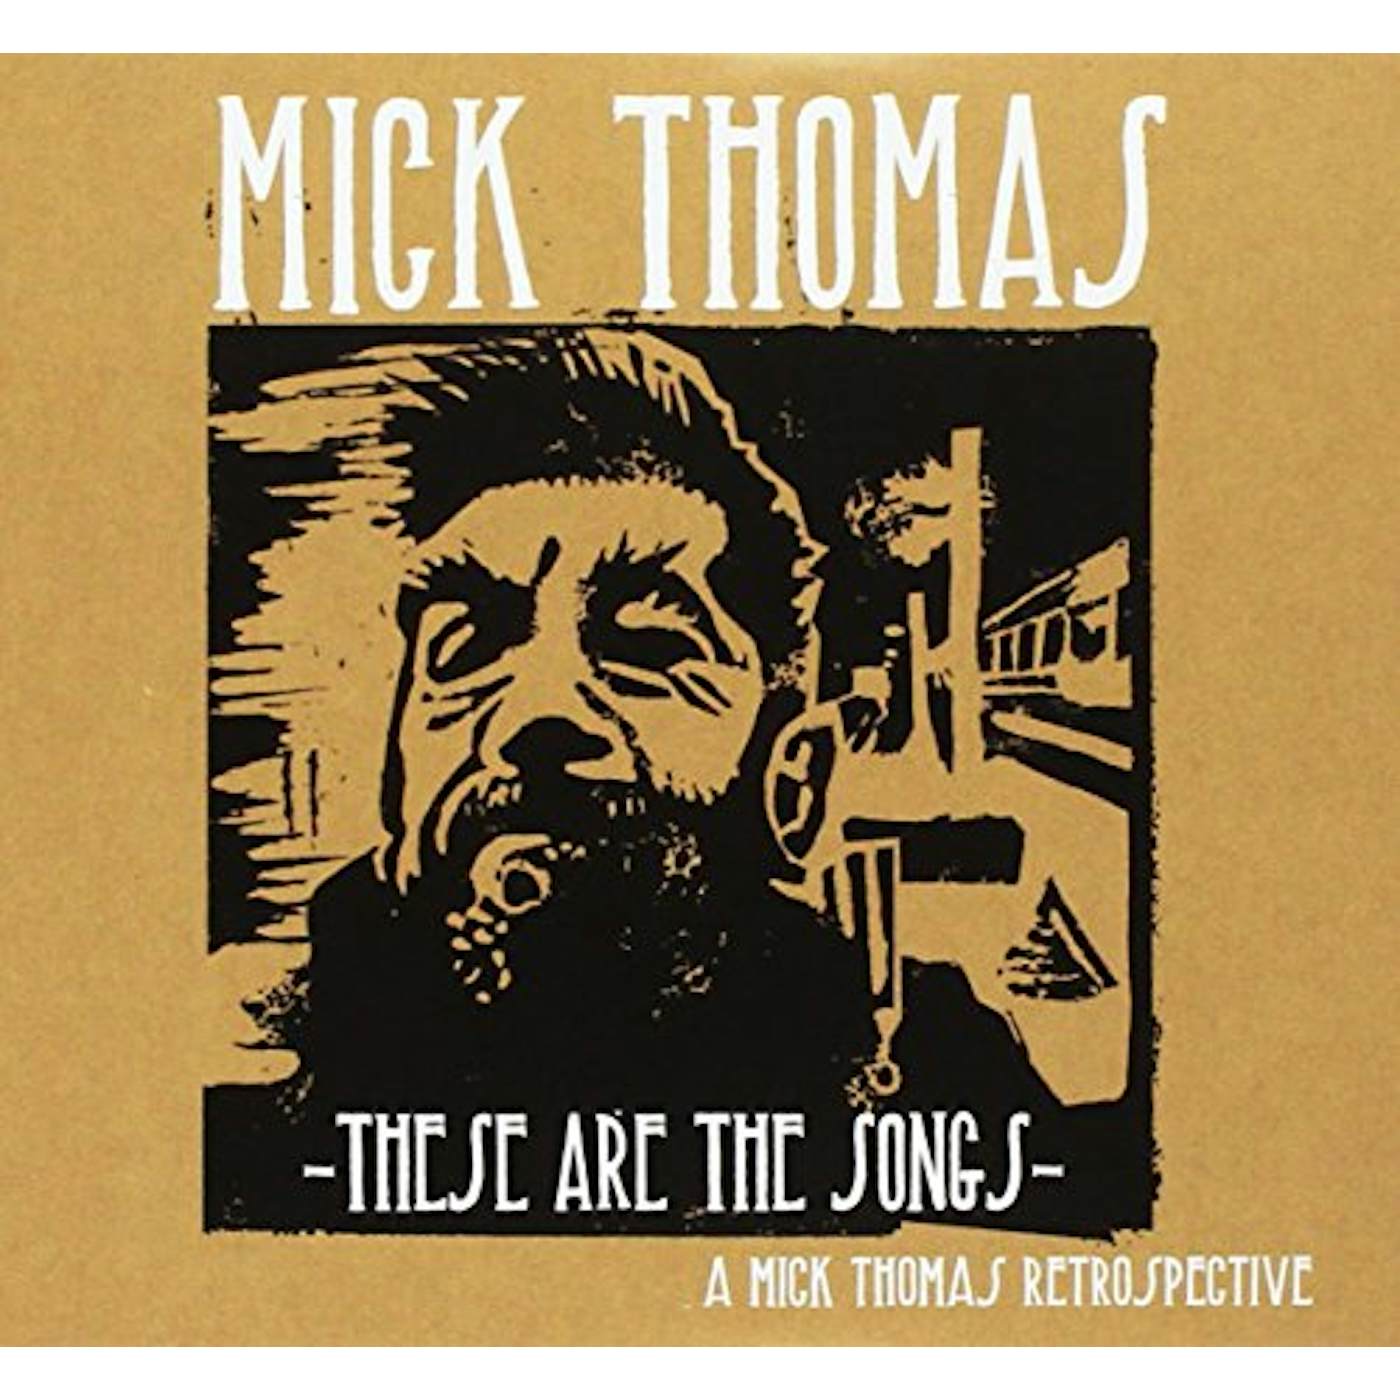 Mick Thomas THESE ARE THE SONGS CD